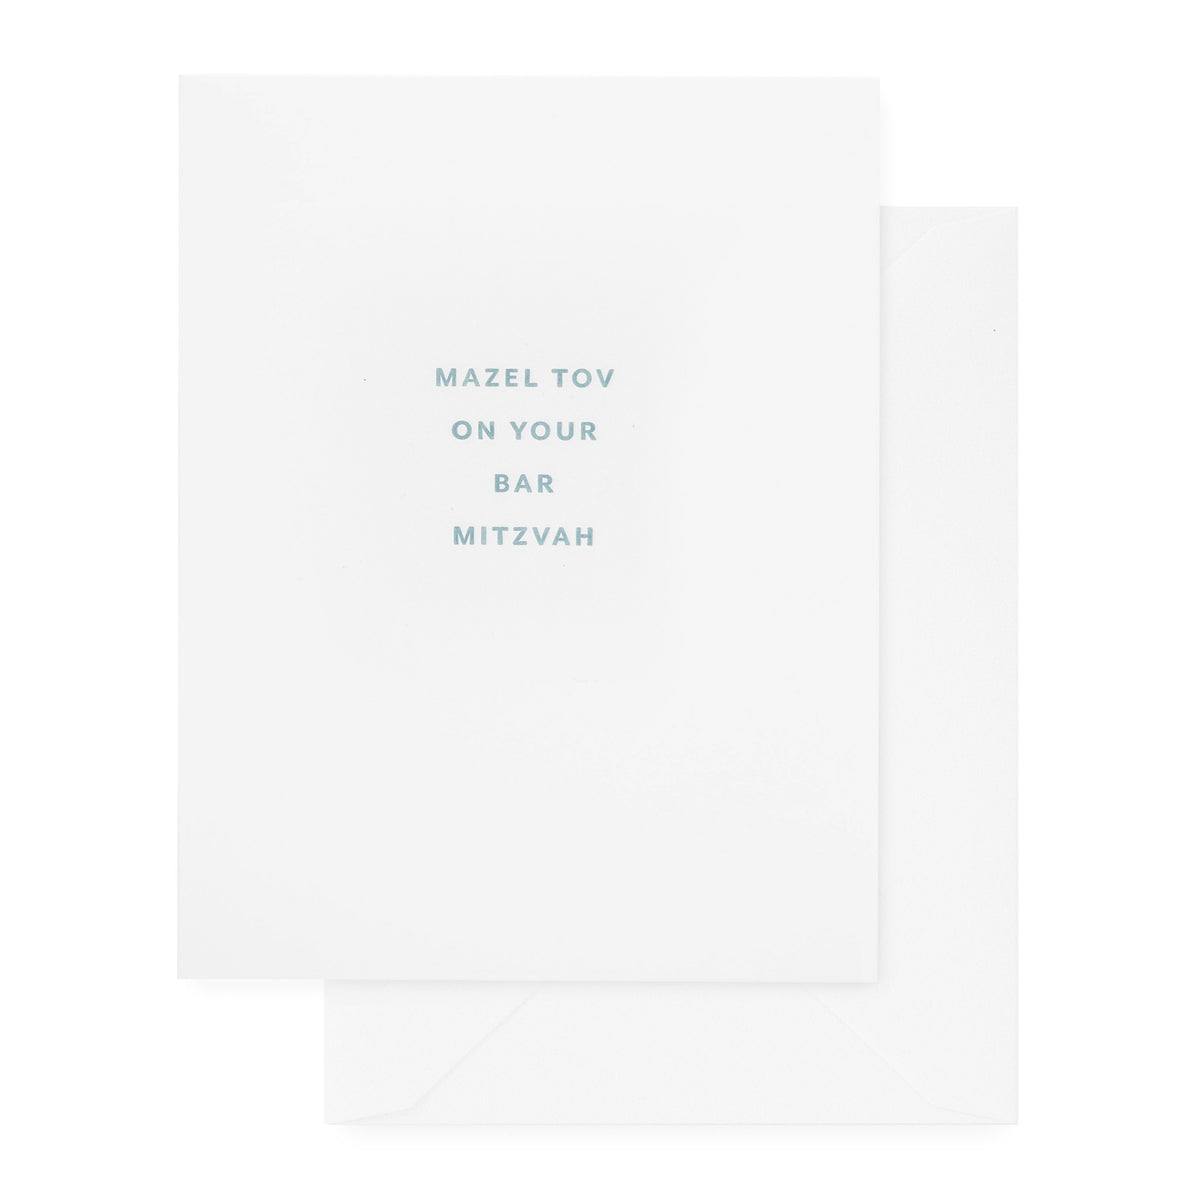 white bar mitzvah card with slate blue text and white envelope